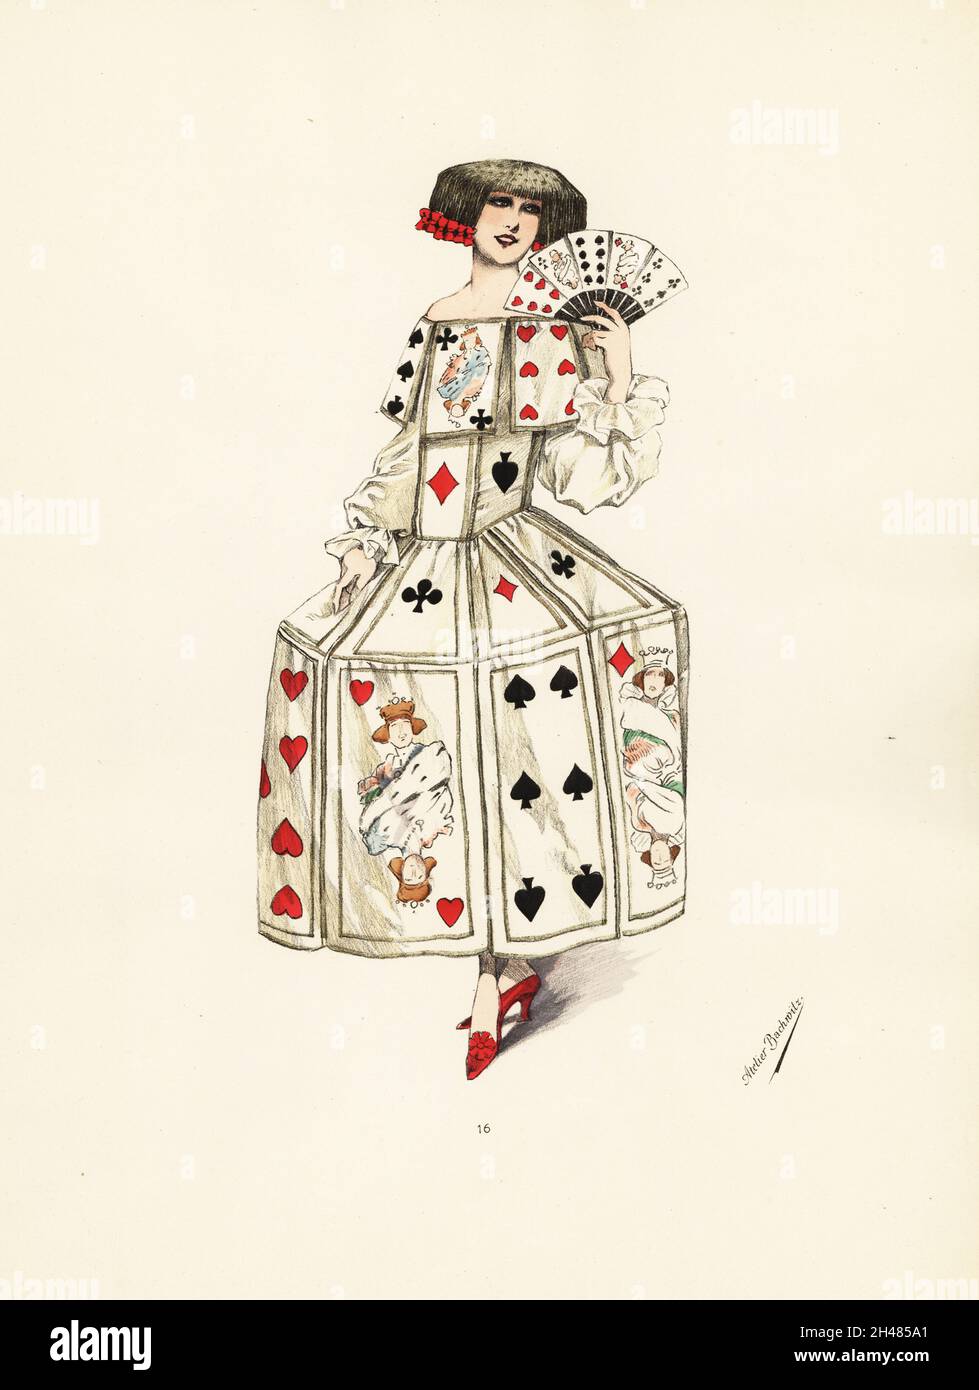 Woman in fancy dress costume as the game of cards with whalebone skirts, dress and fan embroidered with playing cards. Carte a jouer costume, style Infante, de satin blanc, cartes brodees, liserees d'or, corsage et jupe soutenus de balaines. Handcoloured pochoir lithograph from Le Carnival Parisien, Volume 10, a special edition of Chic Parisien, published by Atelier Bachwitz, Vienna, 1920. Stock Photo